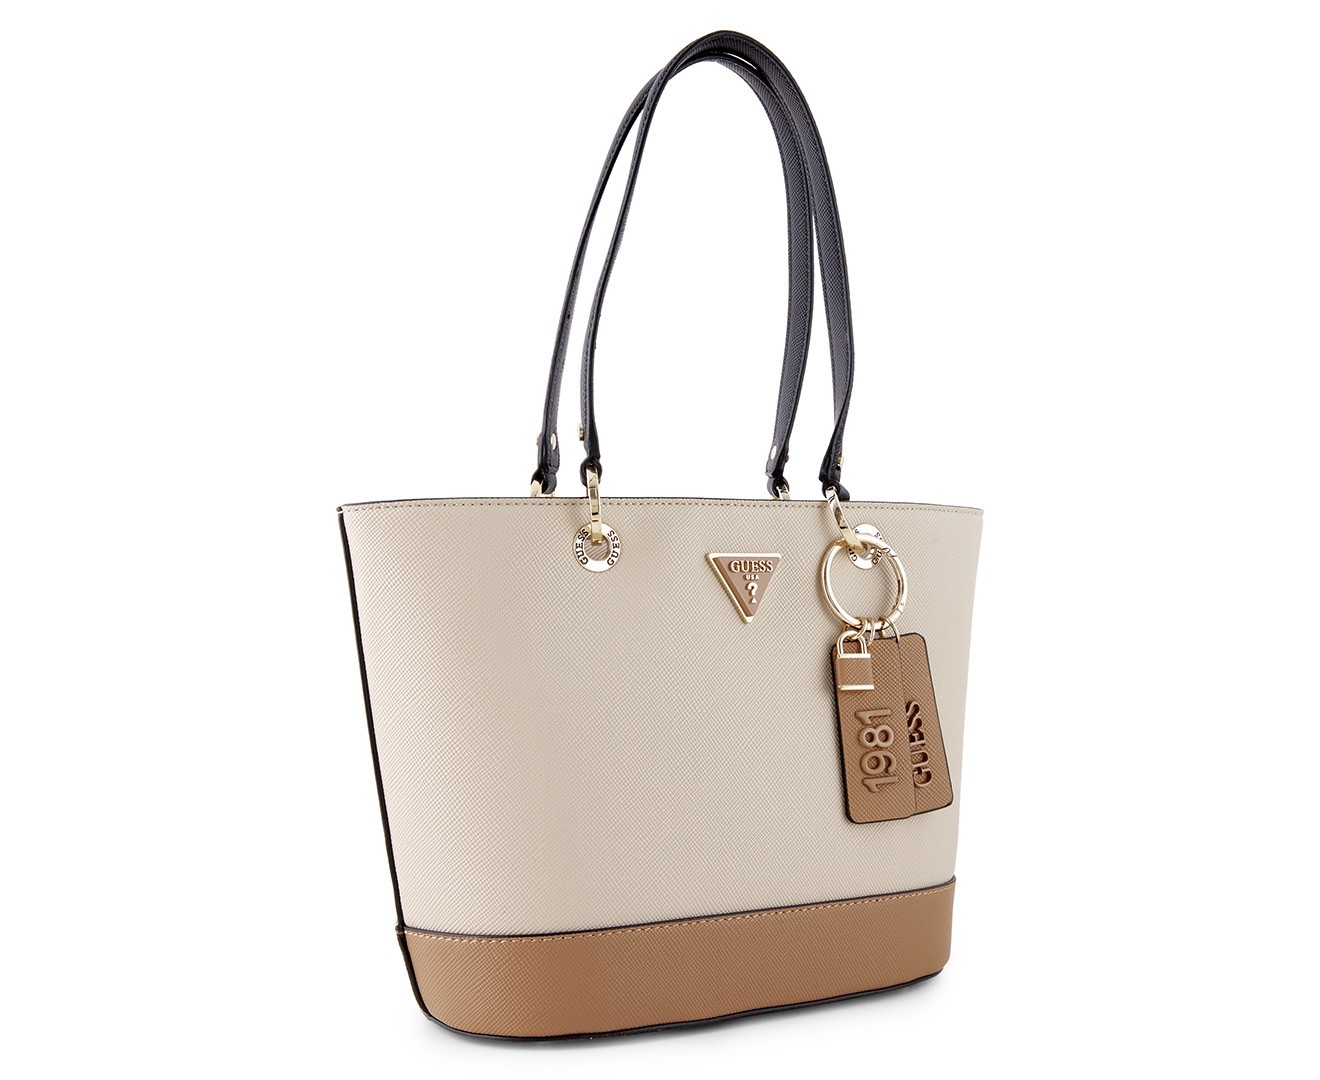 GUESS Noelle Tote - Natural Multi | Catch.co.nz